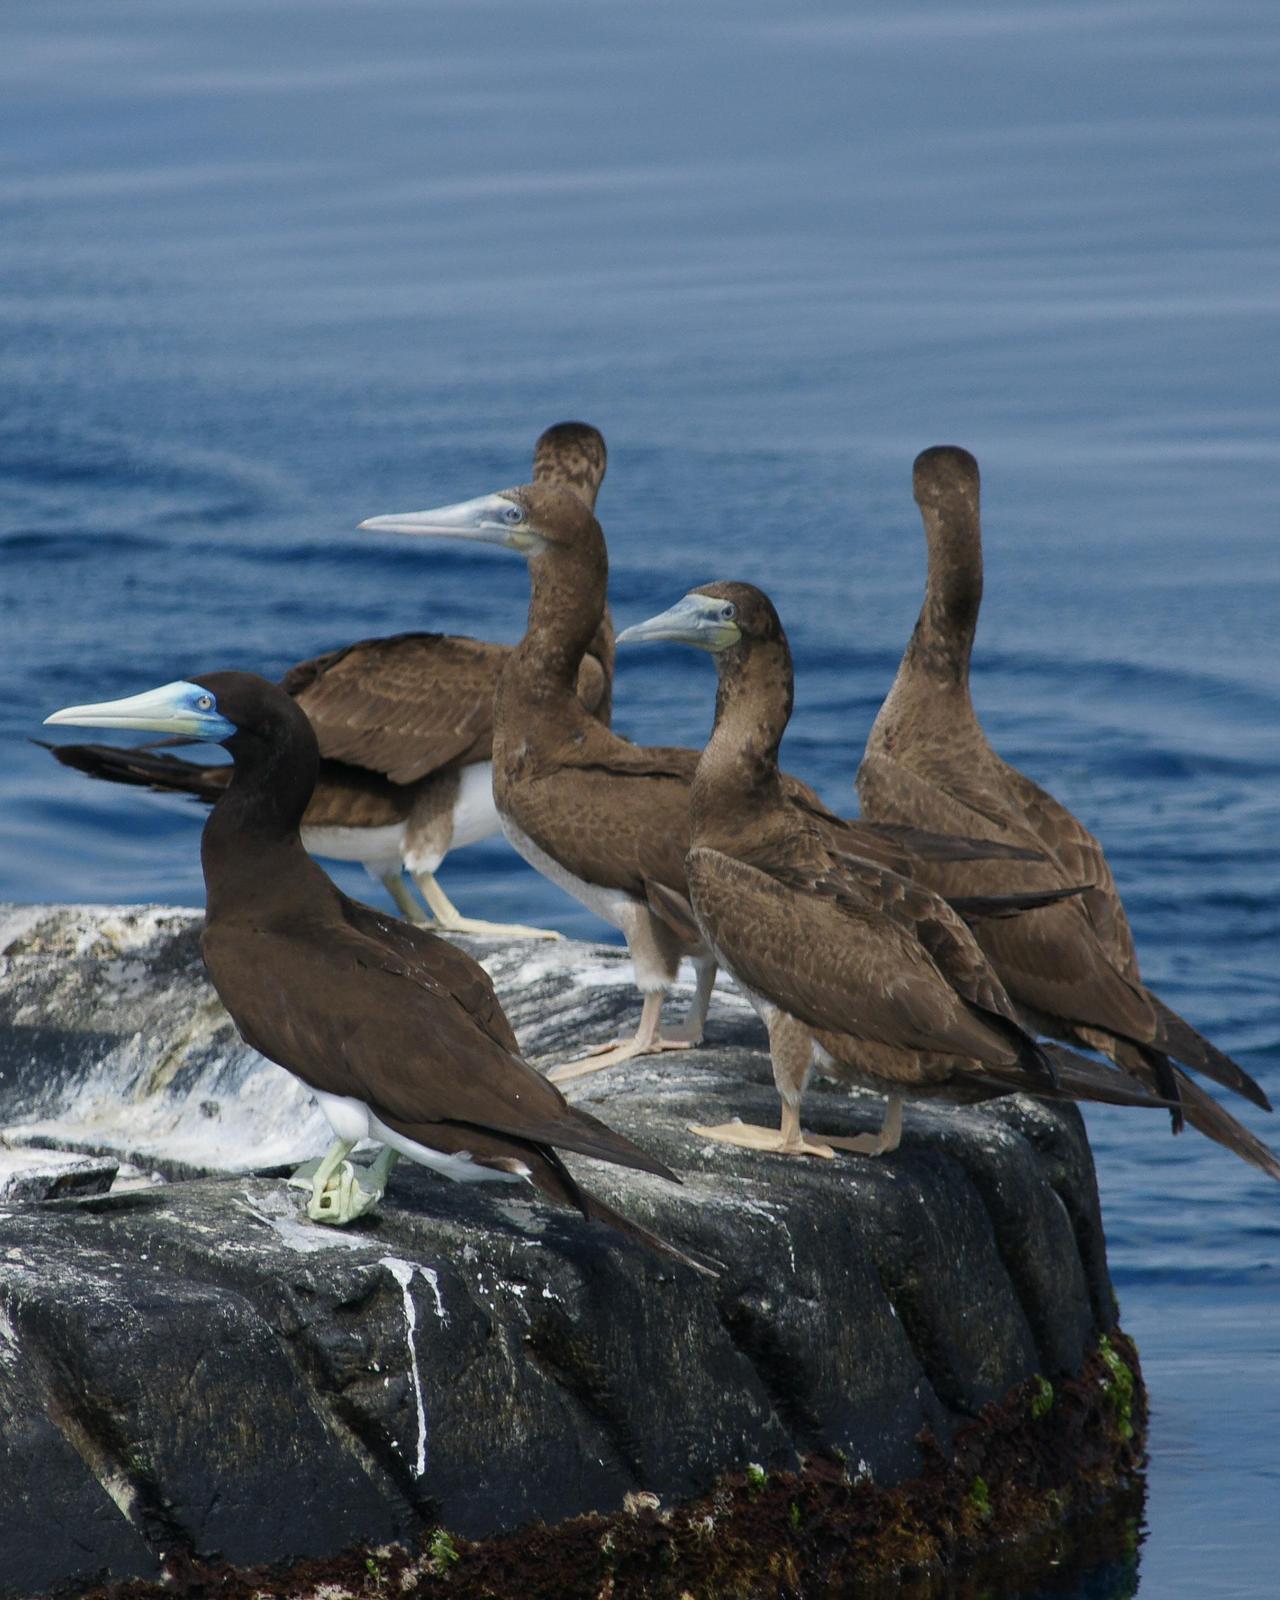 Brown Booby Photo by Steve Percival